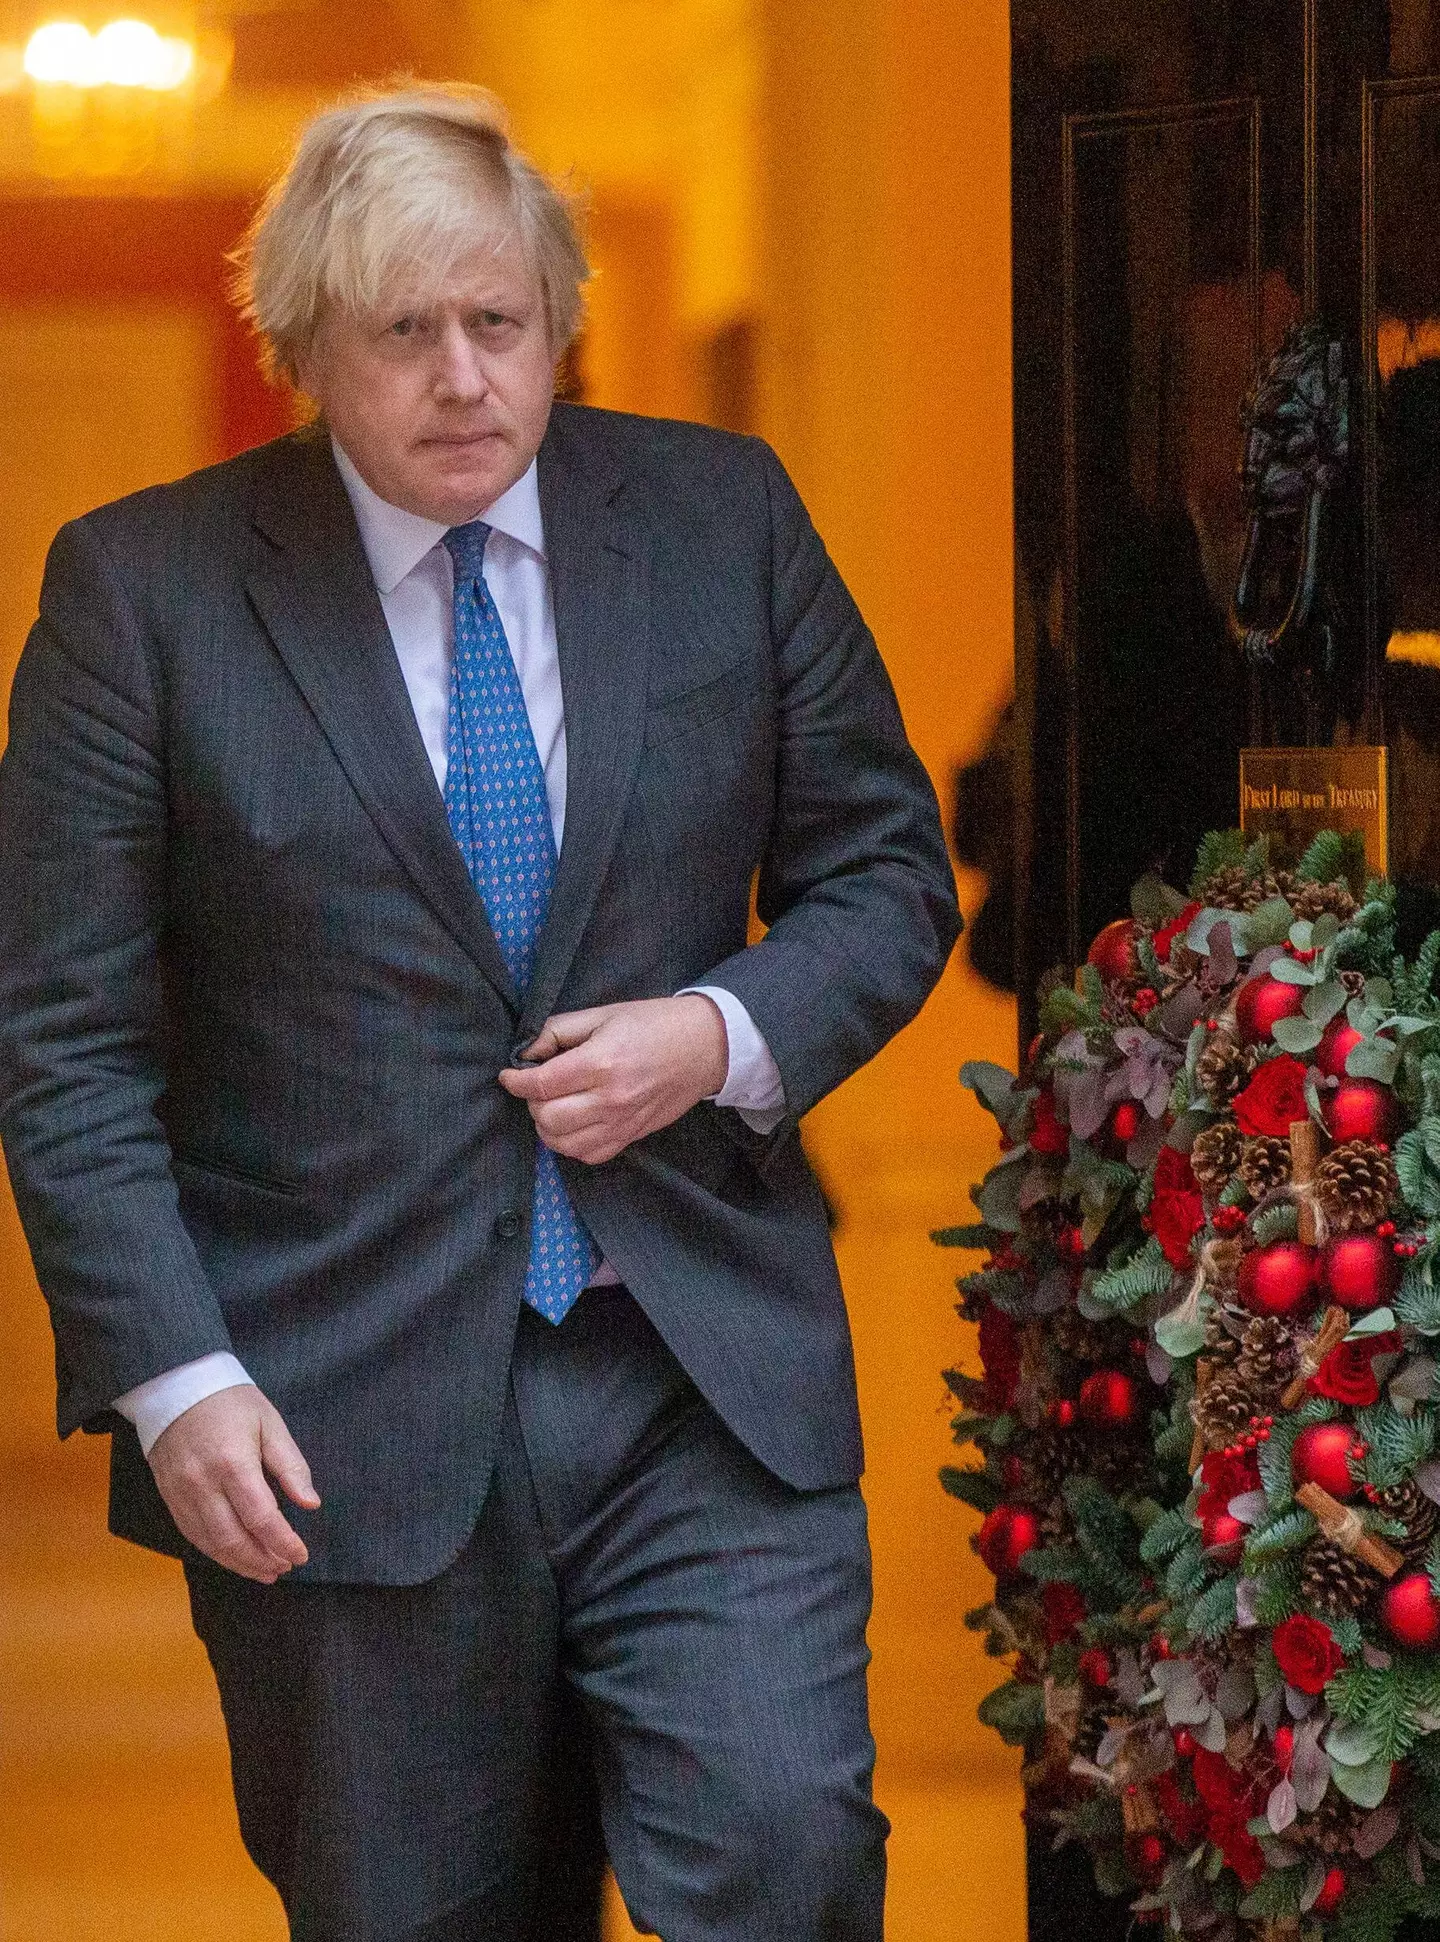 Boris Johnson announced that no restrictions would come into place before Christmas Day.